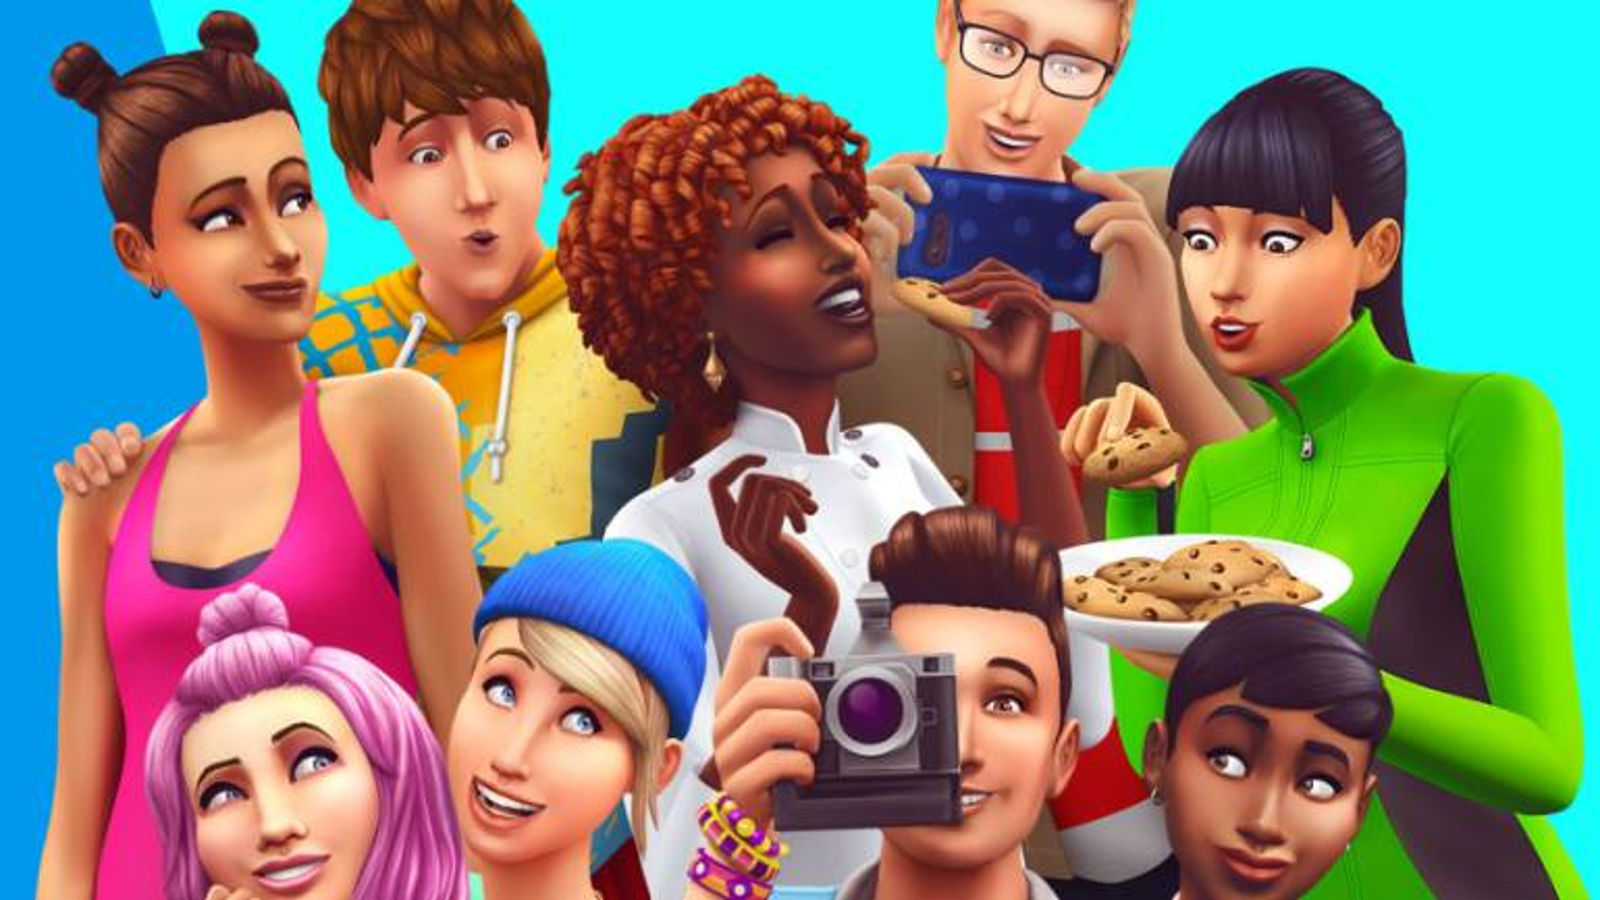 The Sims 5 confirmed to be 'free to download